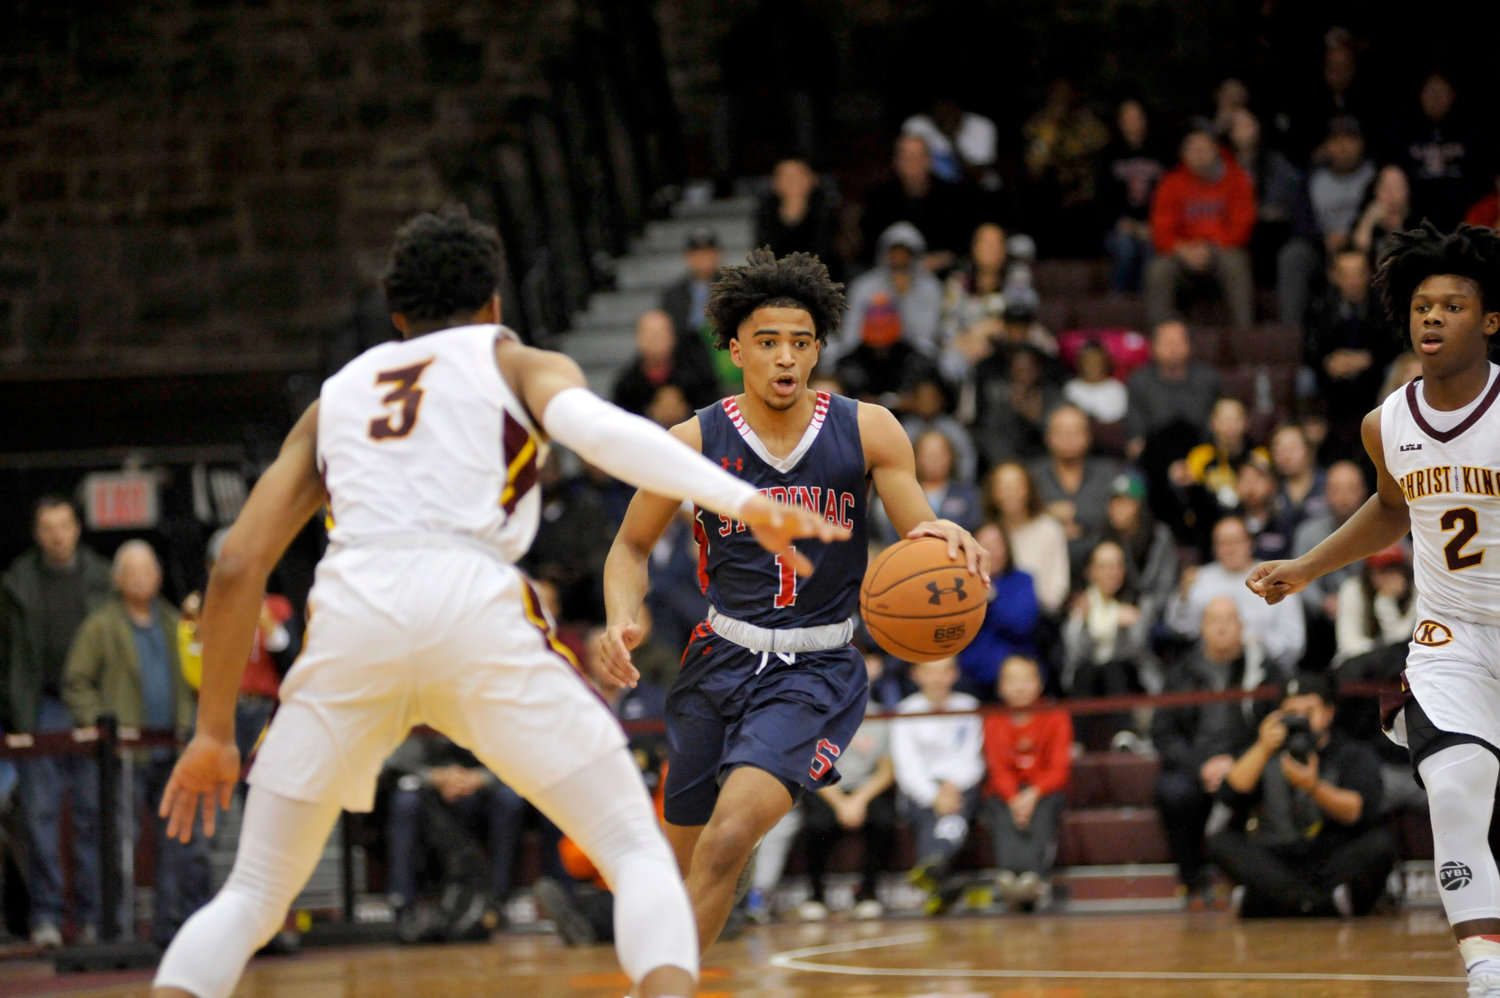 Archbishop Stepinac High School senior guard RJ Davis, seen dribbling the ball in last spring’s intersectional championship, has been named Mr. New York State Basketball for the 2019-2020 season.